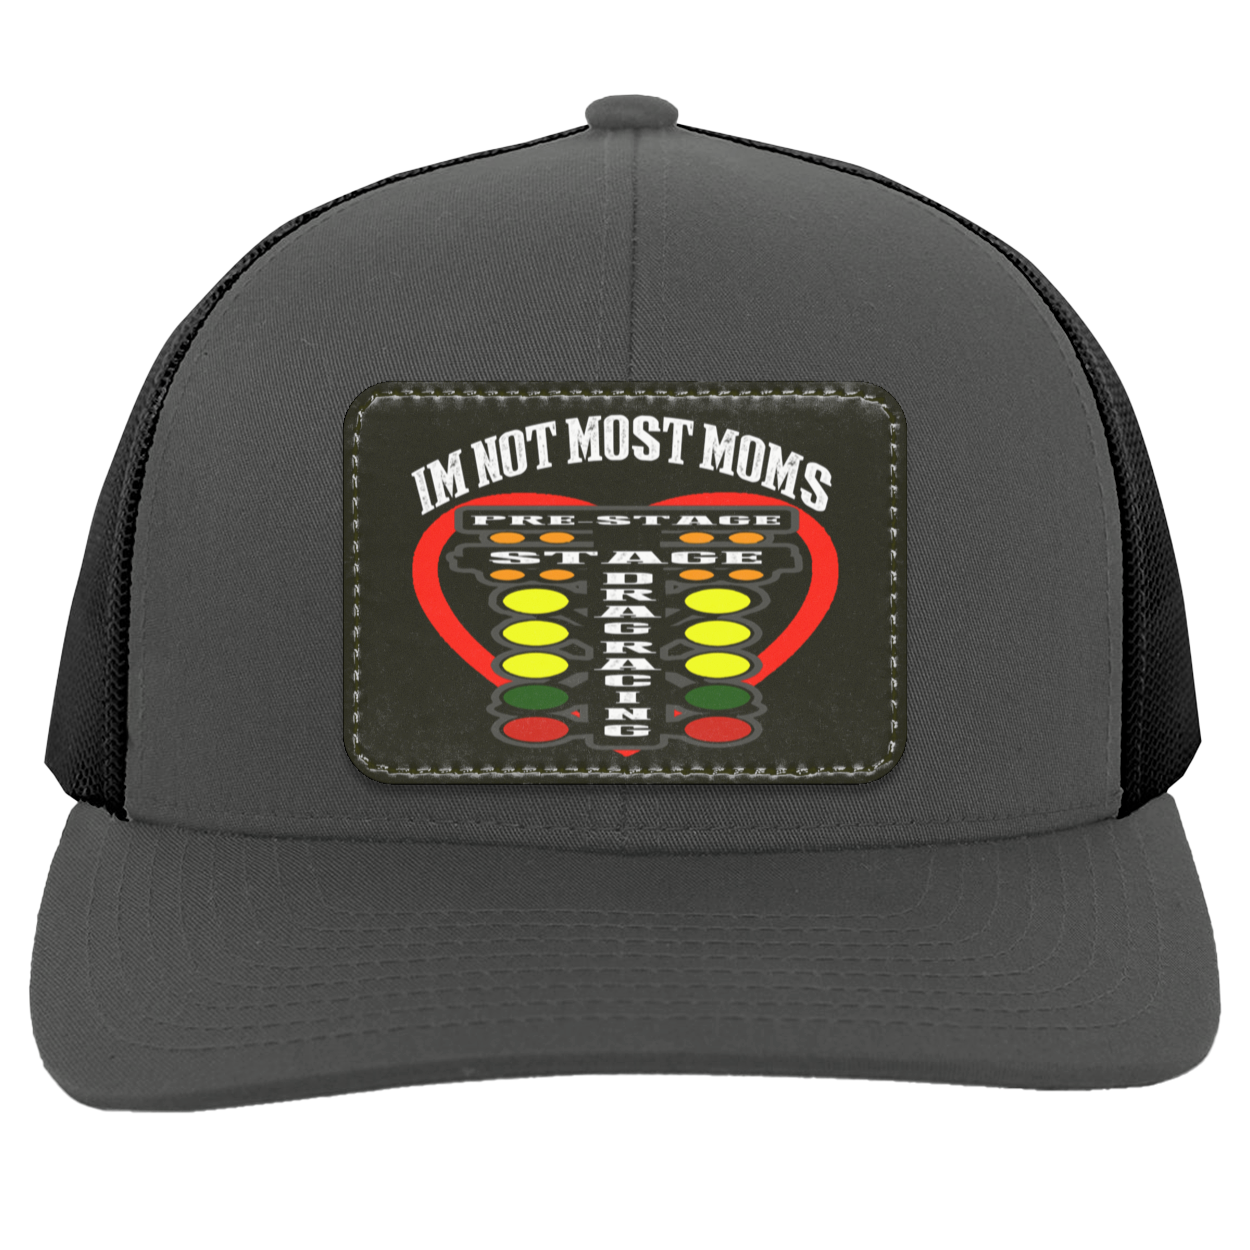 I'm Not Most Moms Drag Racing Trucker Snap Back - Patch